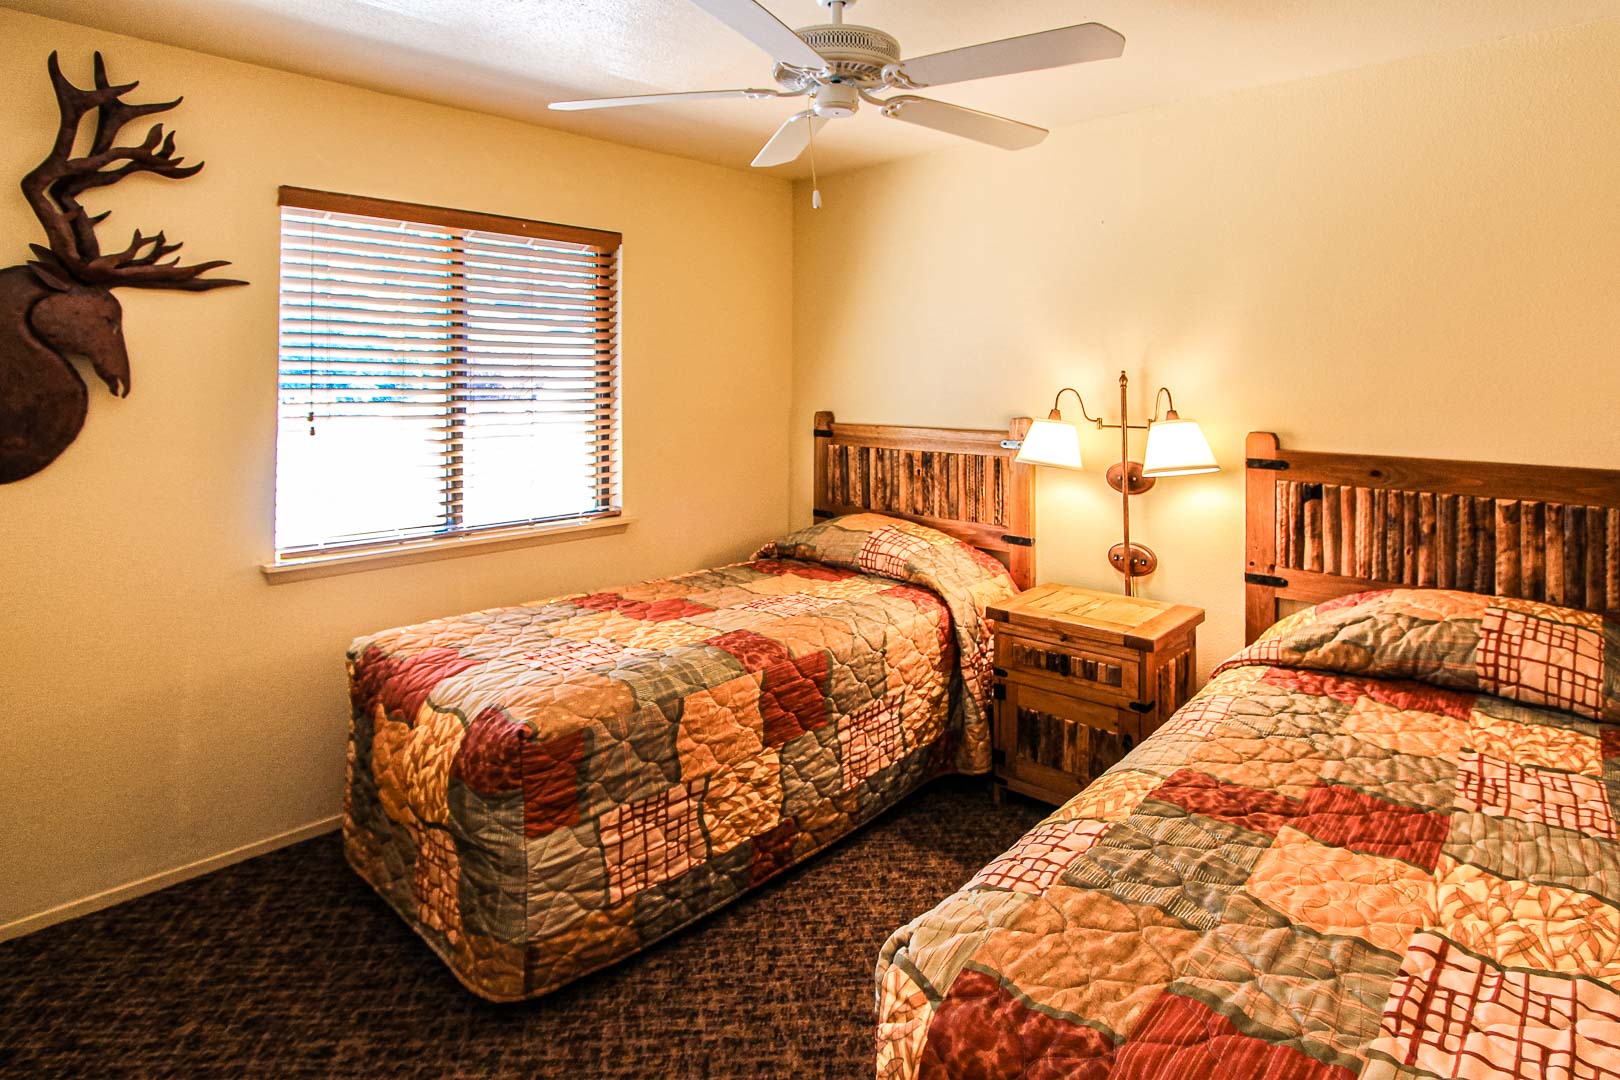 A standard two bedroom unit with double beds at VRI's Crown Point Condominiums in New Mexico.